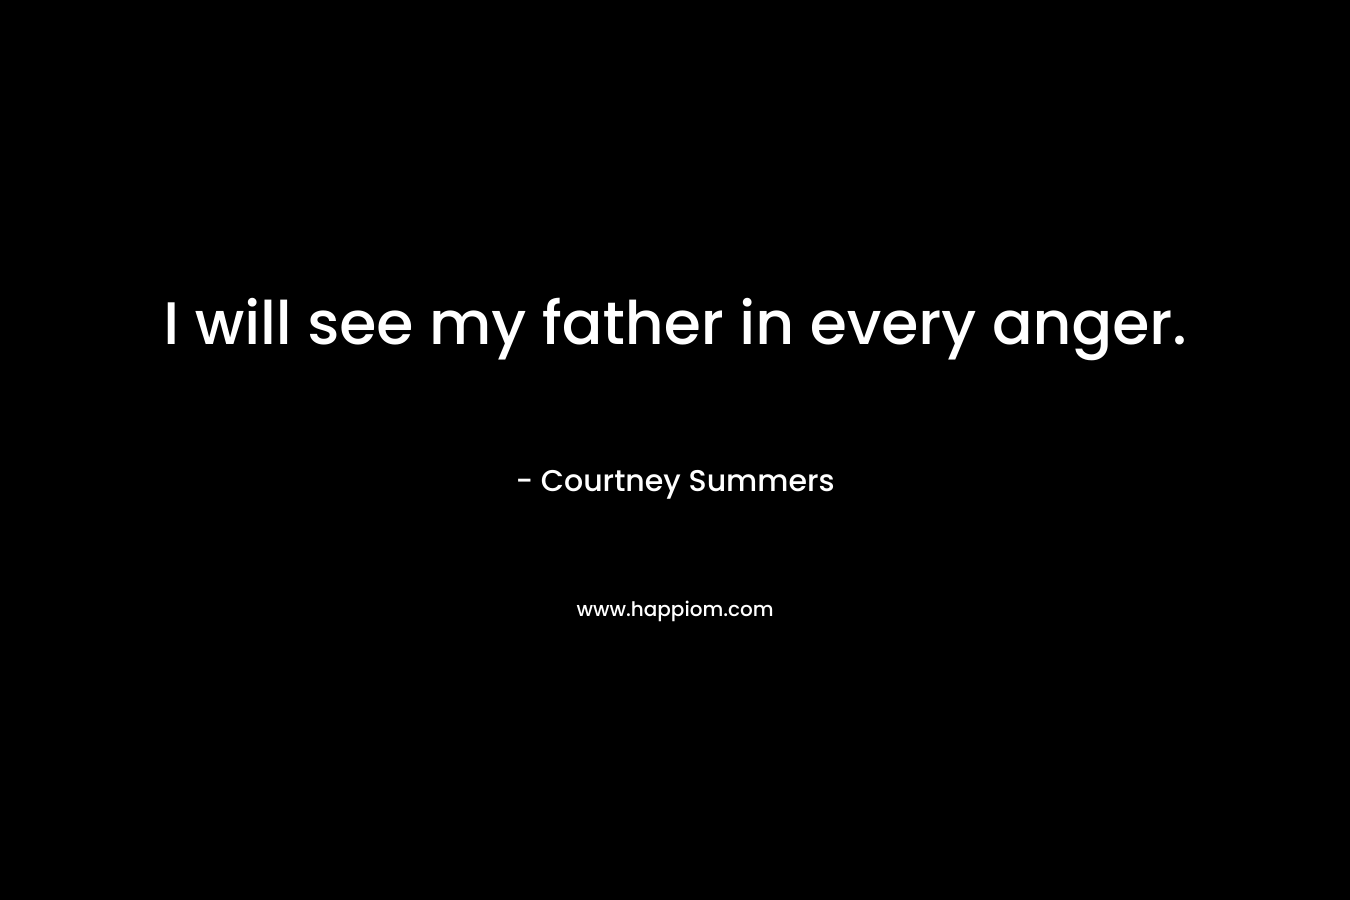 I will see my father in every anger. – Courtney Summers